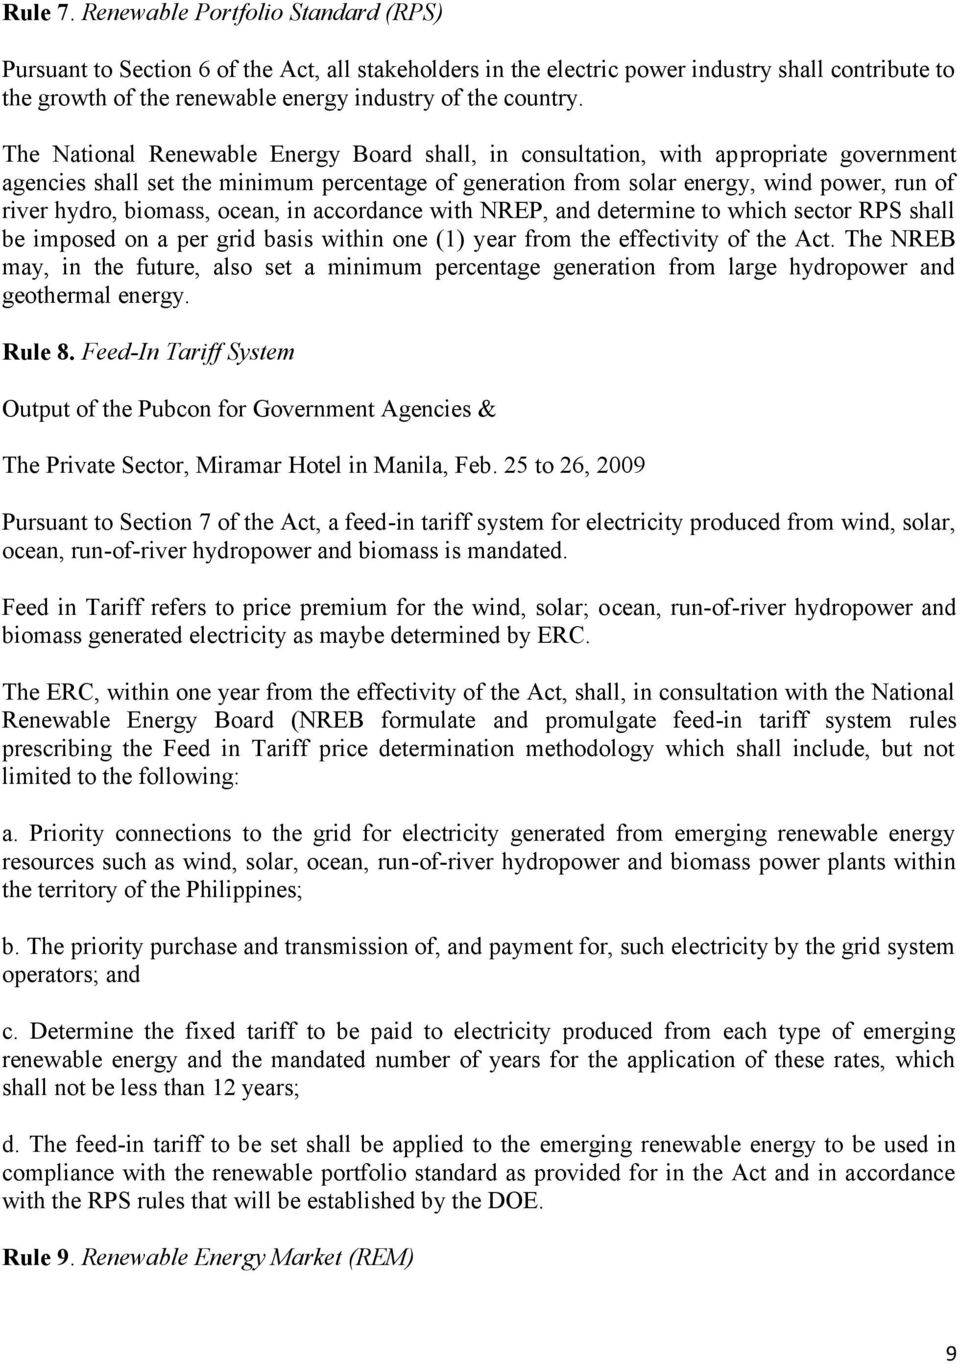 The National Renewable Energy Board shall, in consultation, with appropriate government agencies shall set the minimum percentage of generation from solar energy, wind power, run of river hydro,